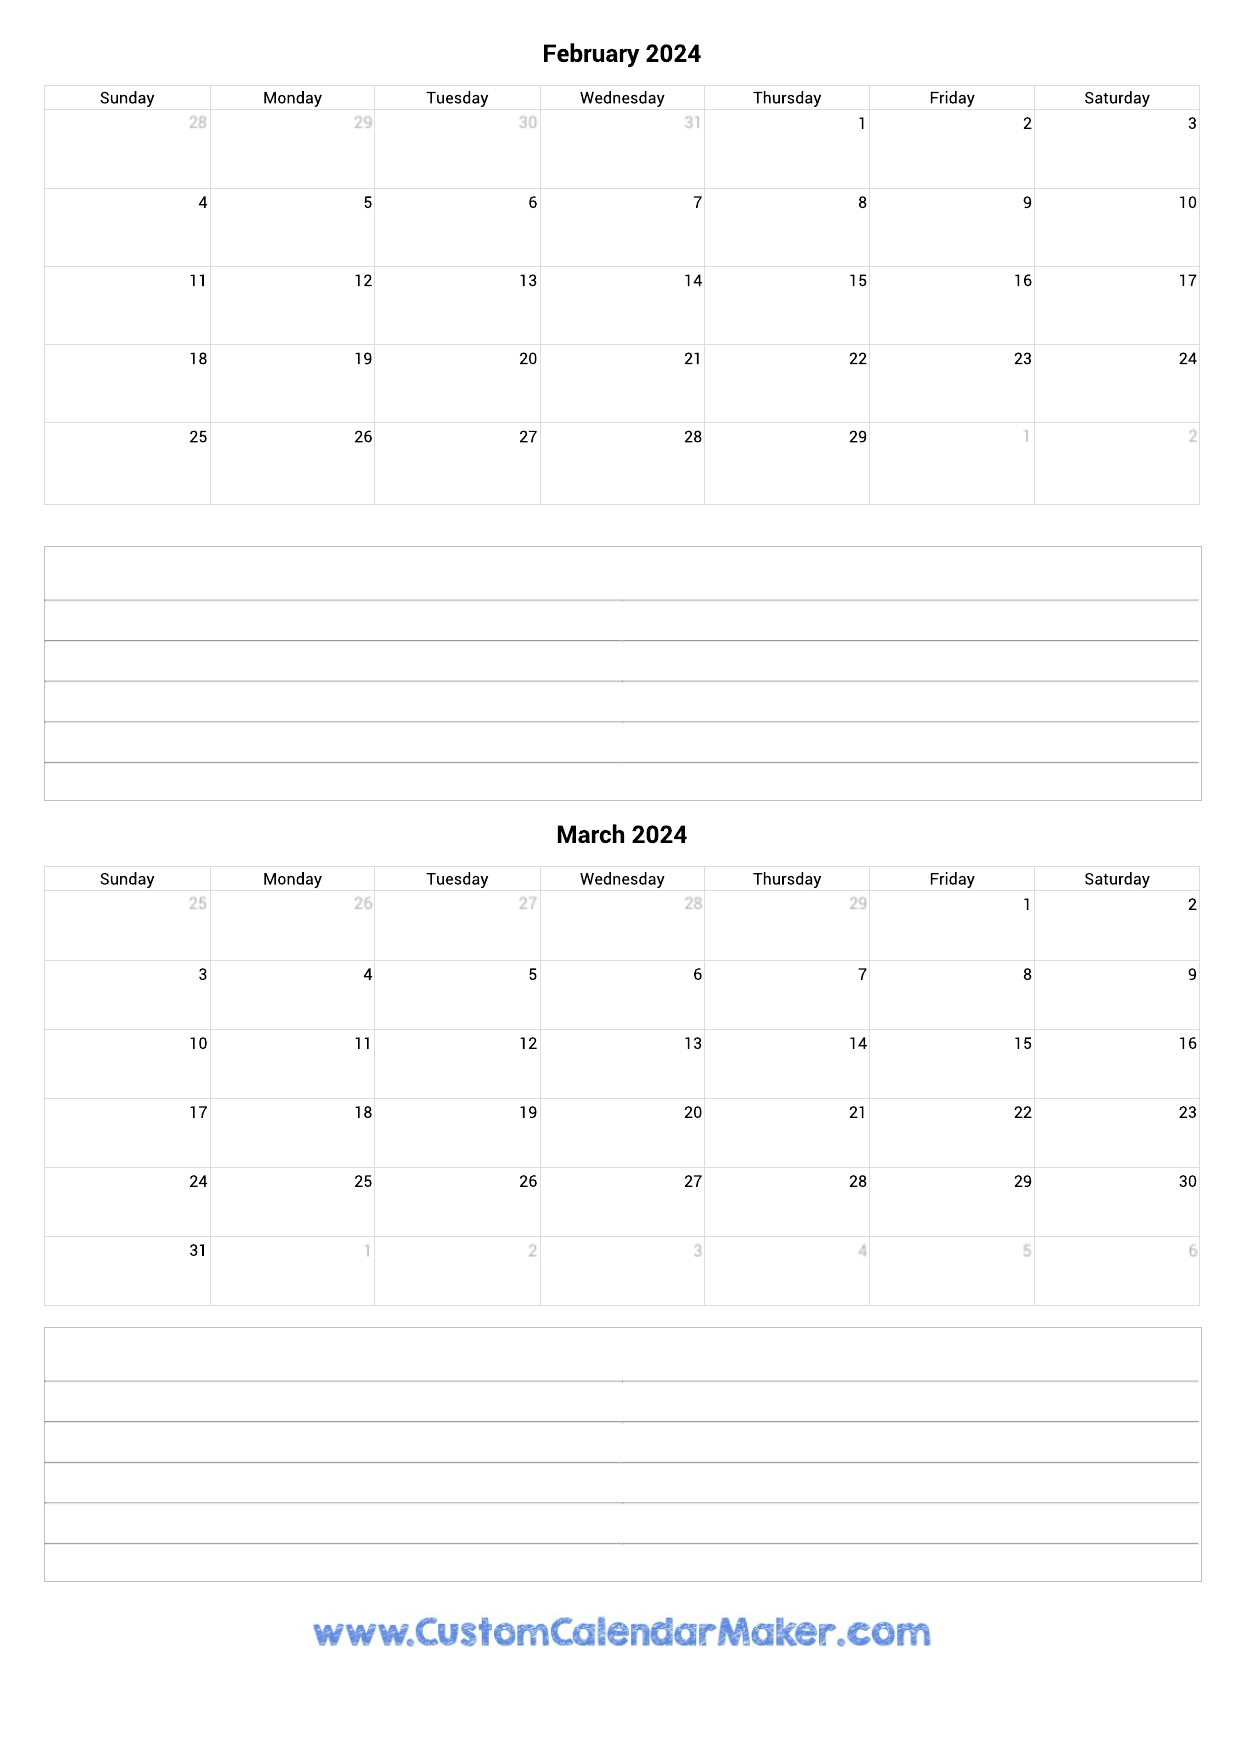 February And March 2024 Calendar for February And March 2024 Printable Calendar